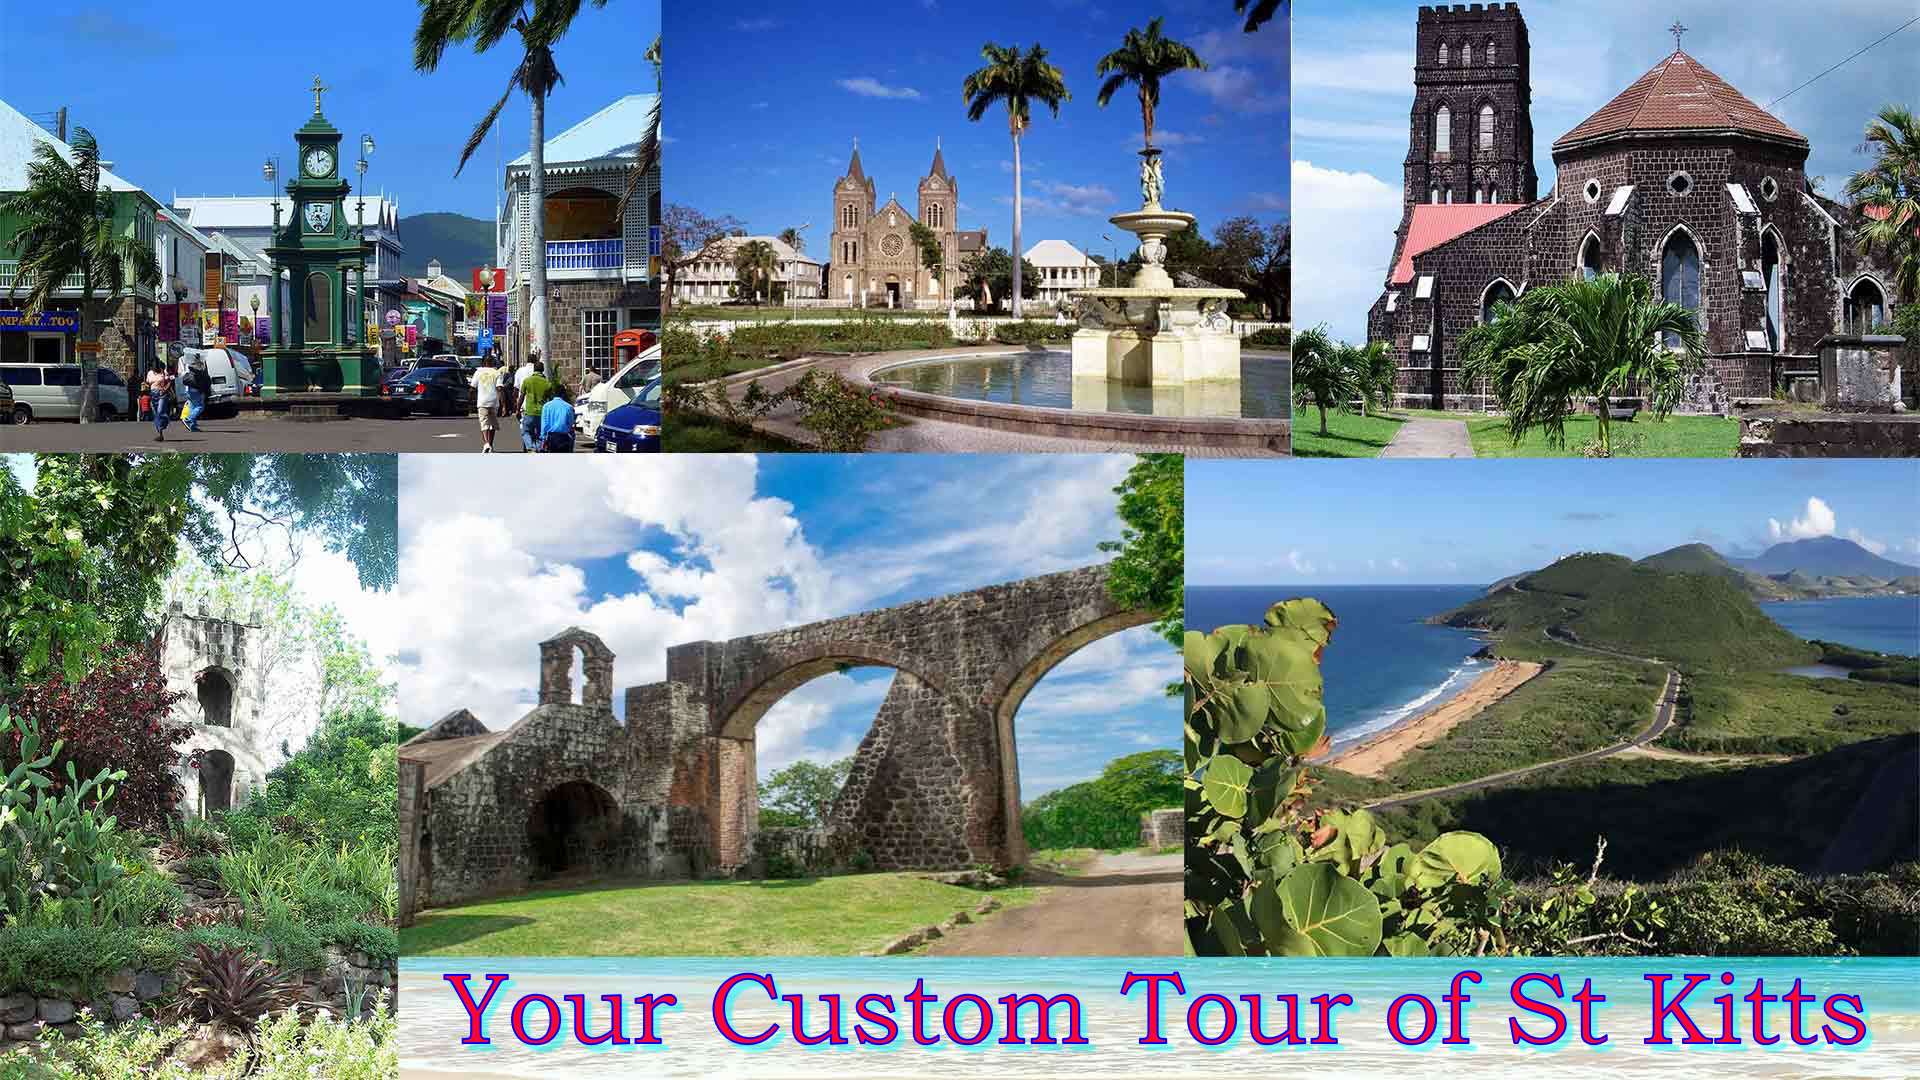 Tour Highlights of St Kitts